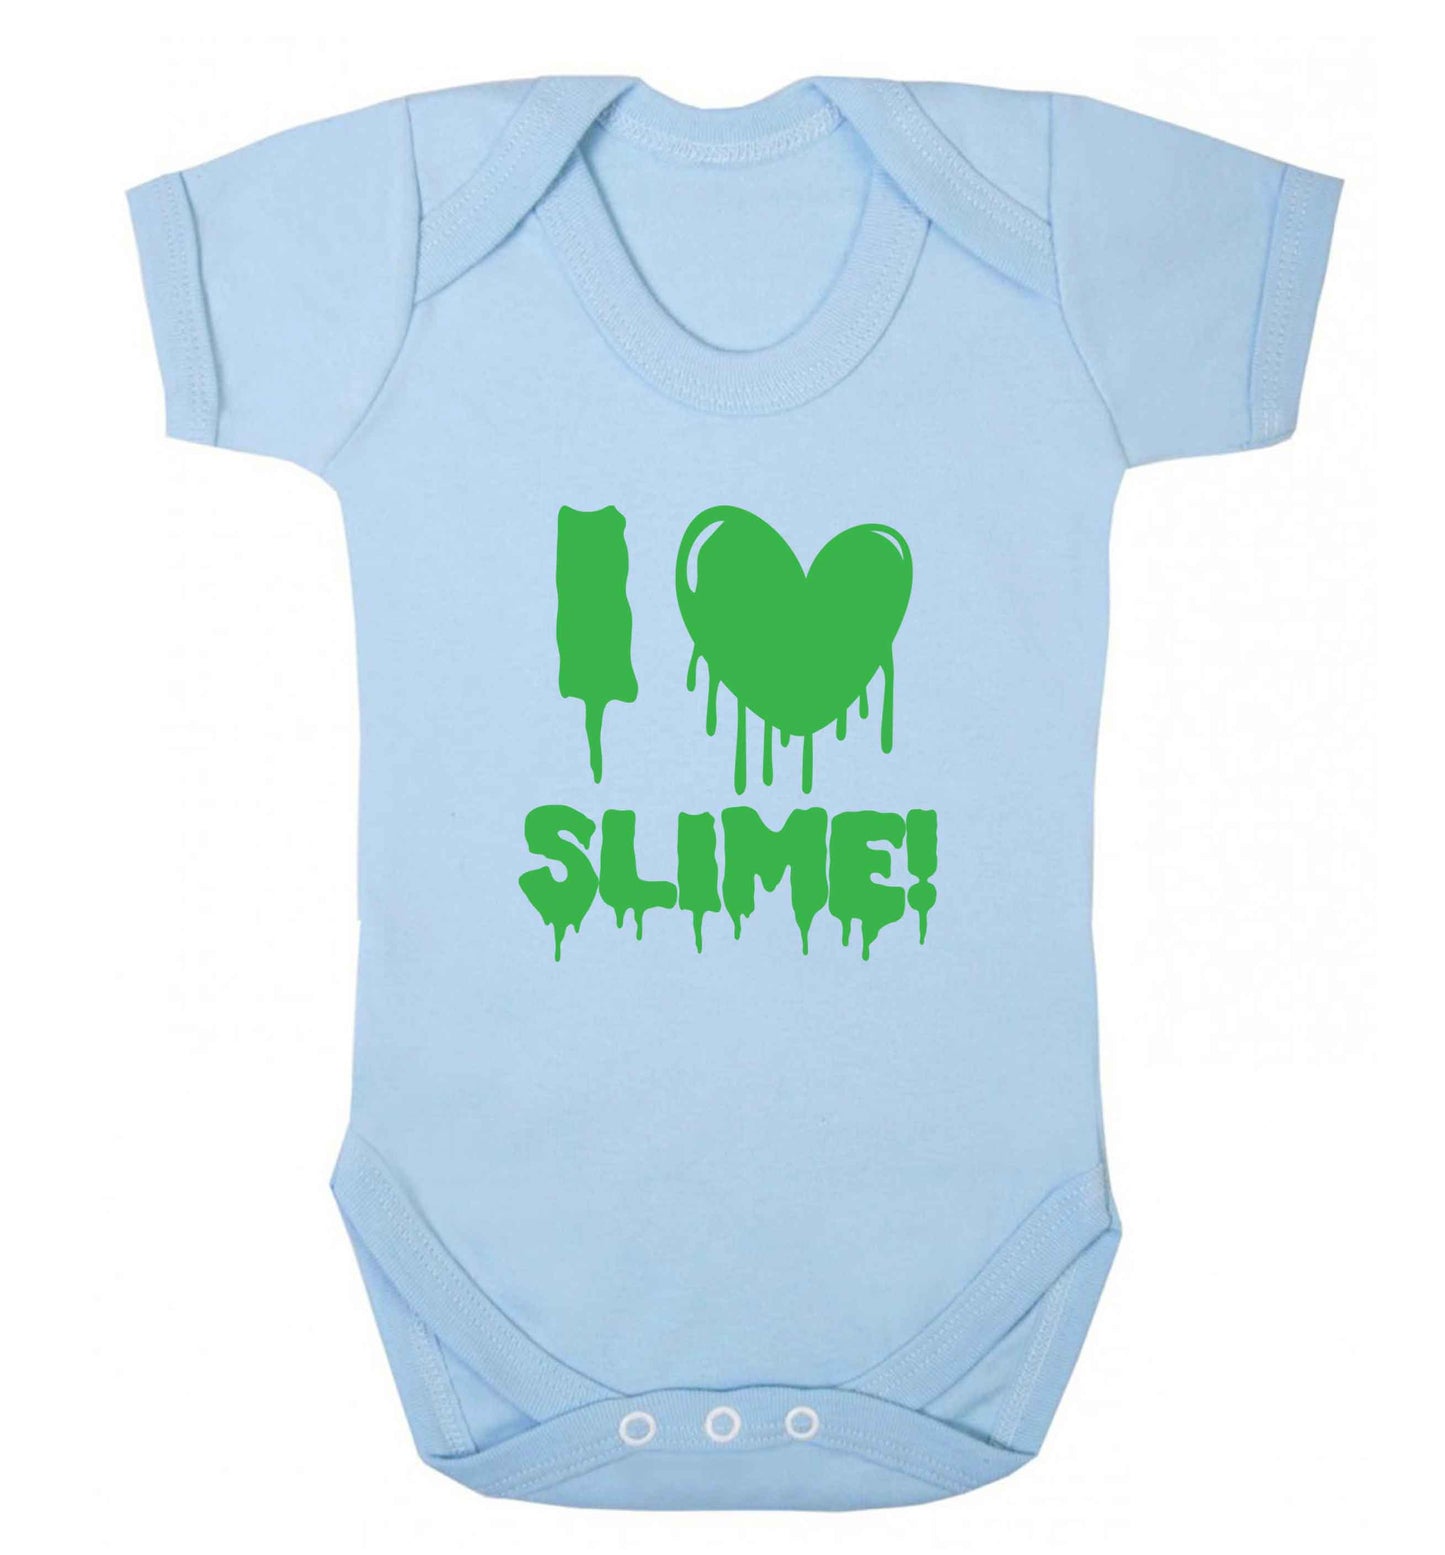 Neon green I love slime baby vest pale blue 18-24 months